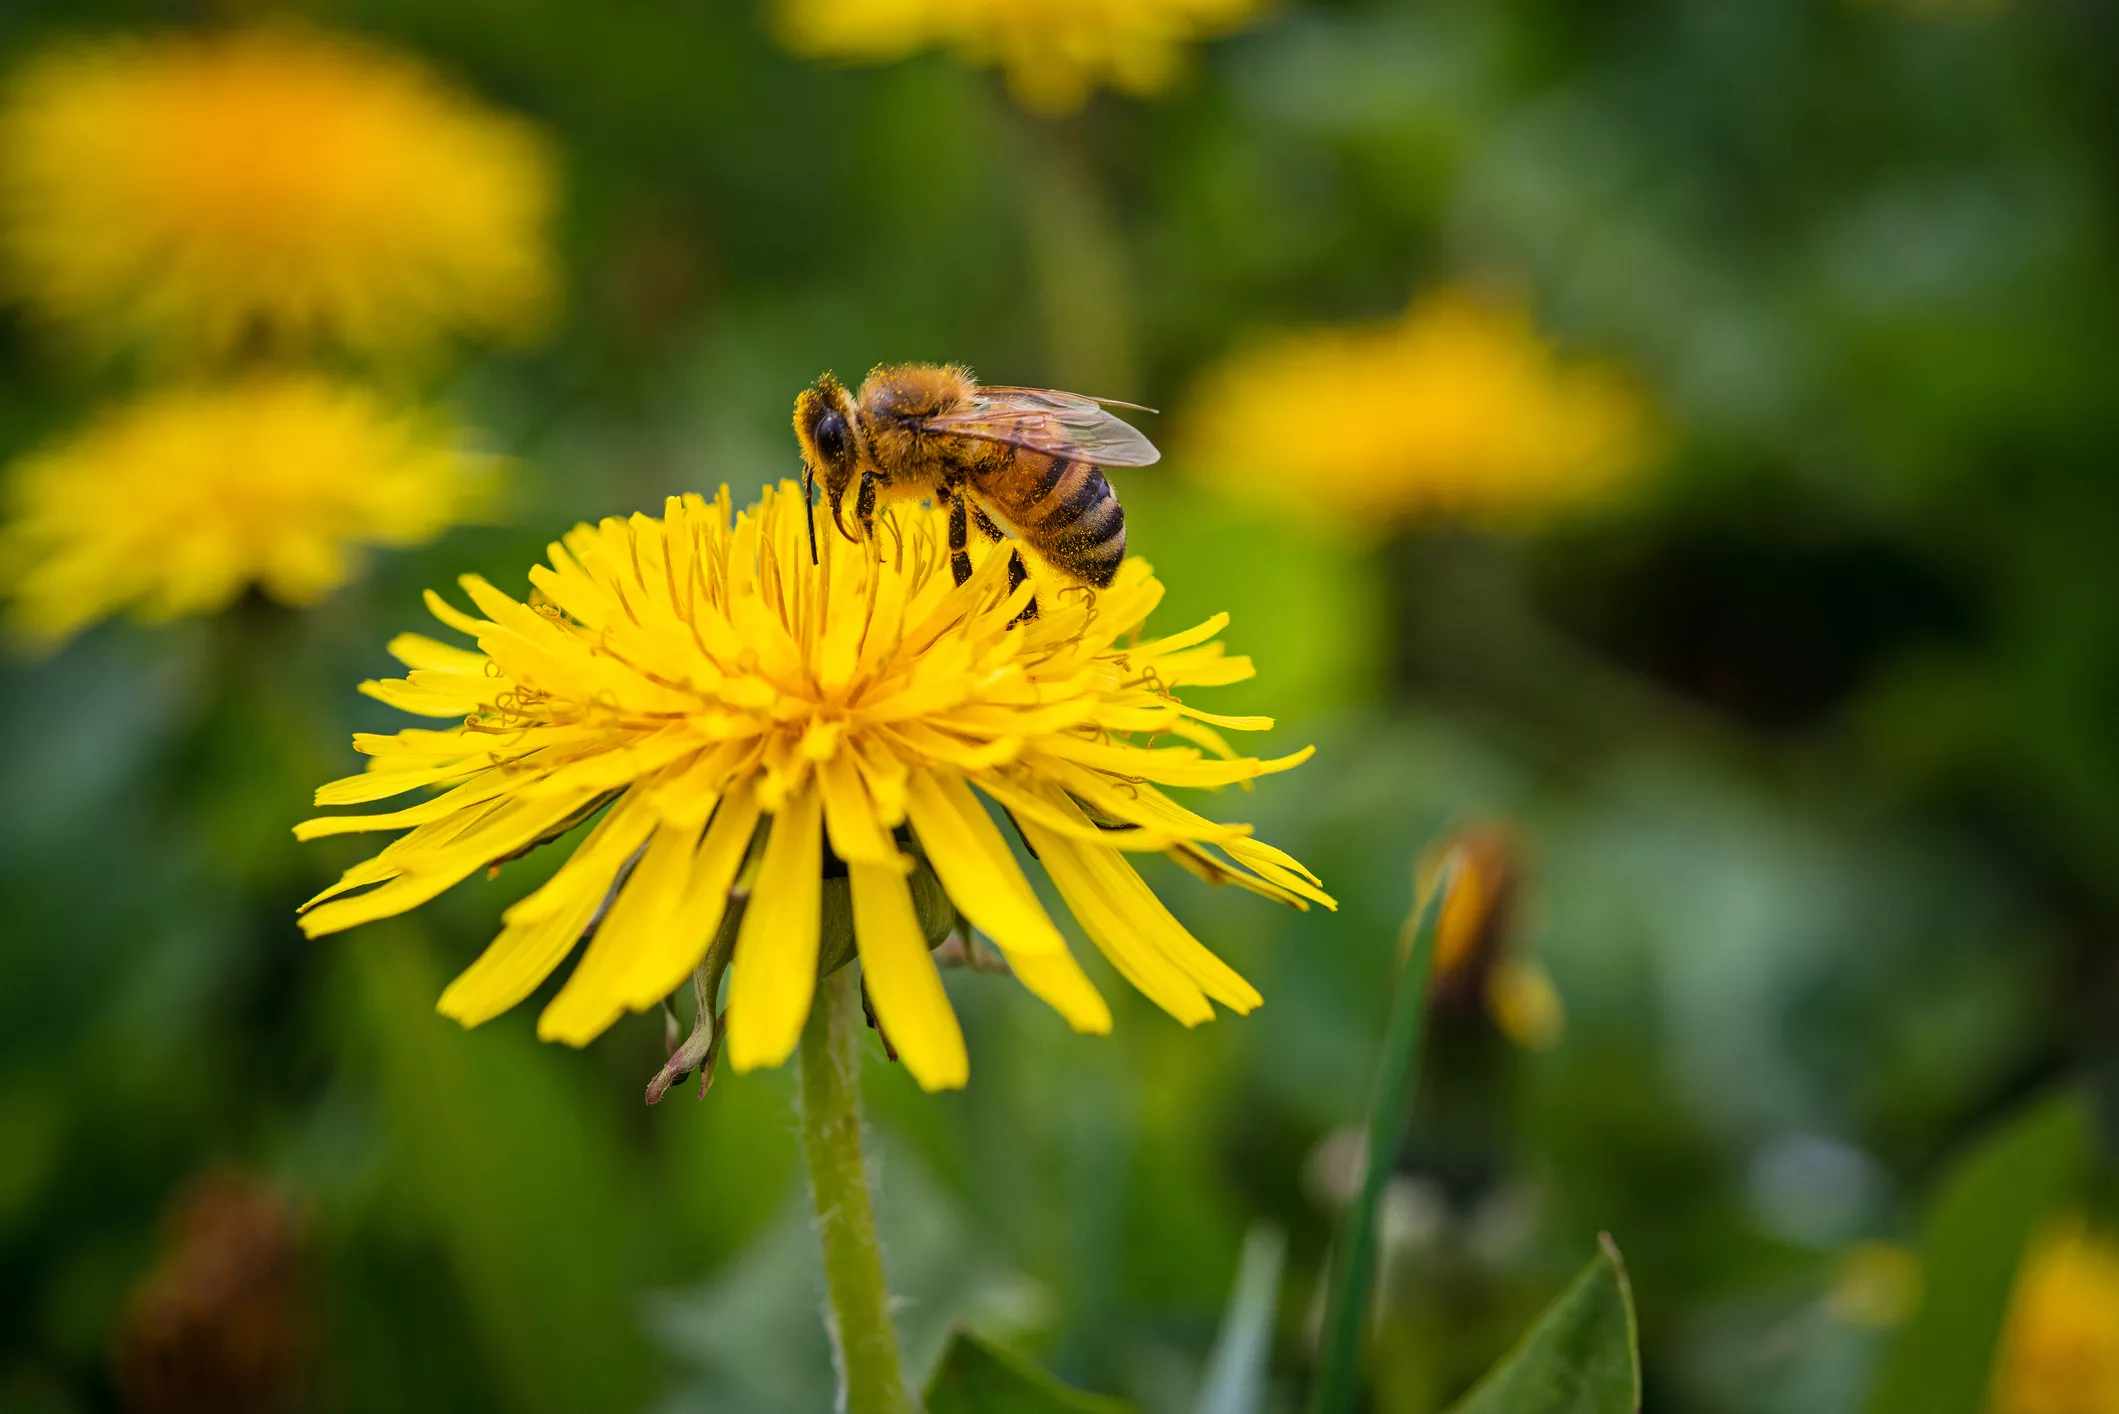 Close-up of a honeybee on a dandelion